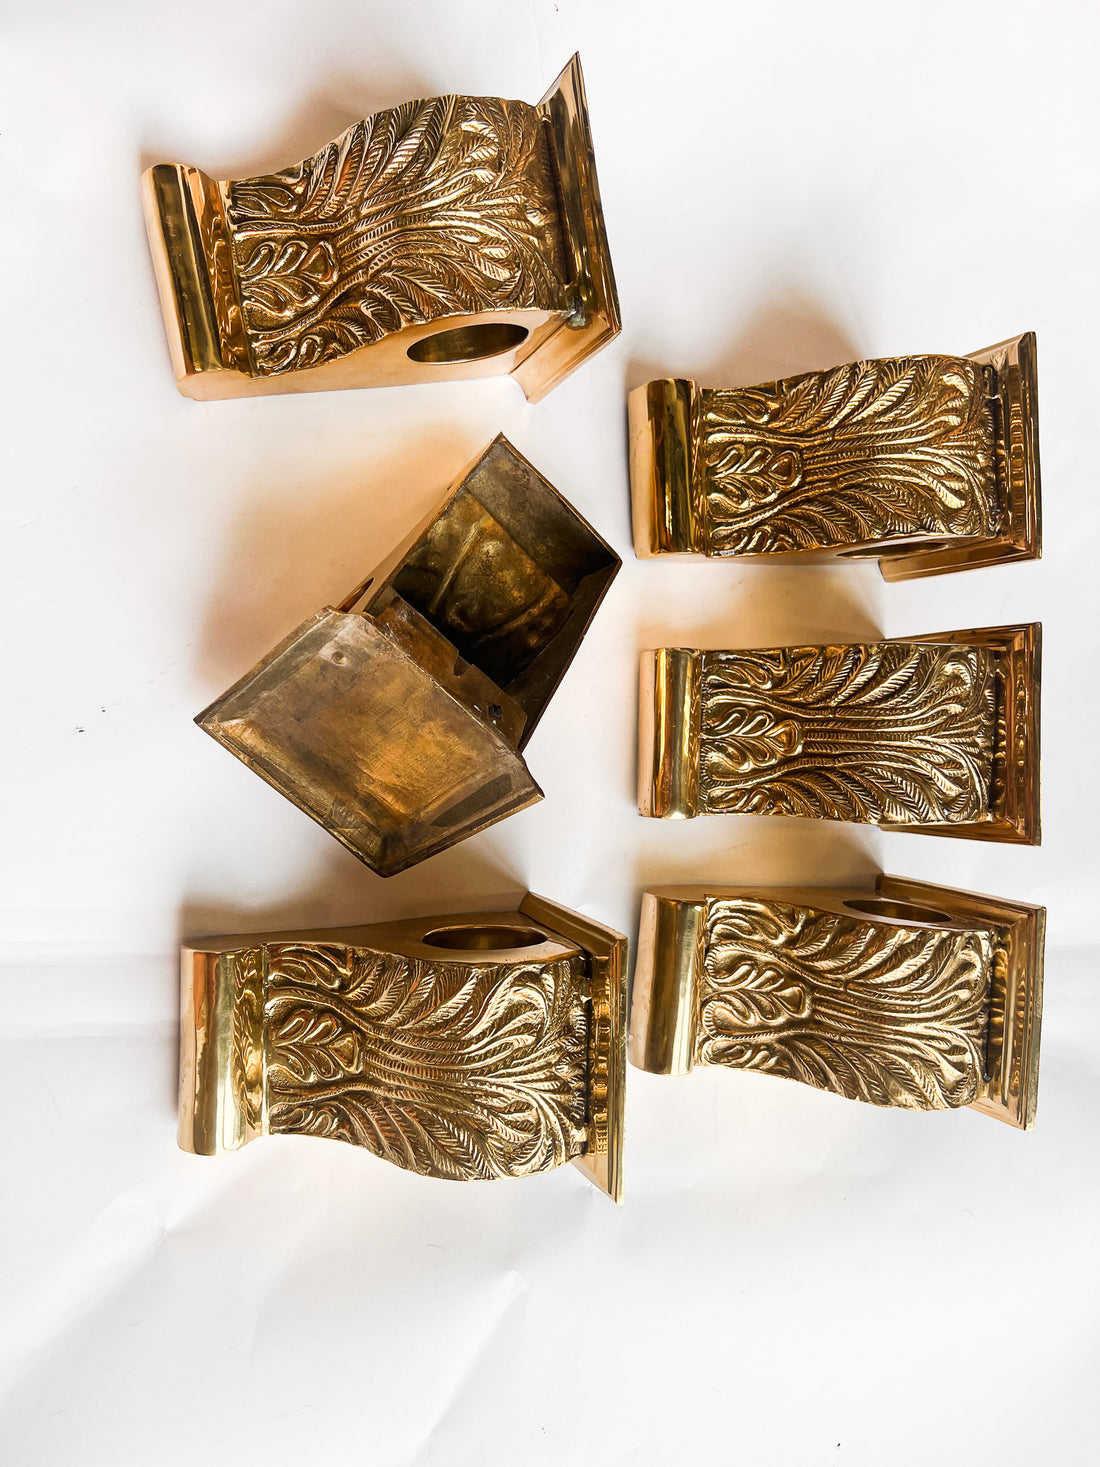 Heavy Solid Brass Wall mount bracket corbels (Sold Individually)